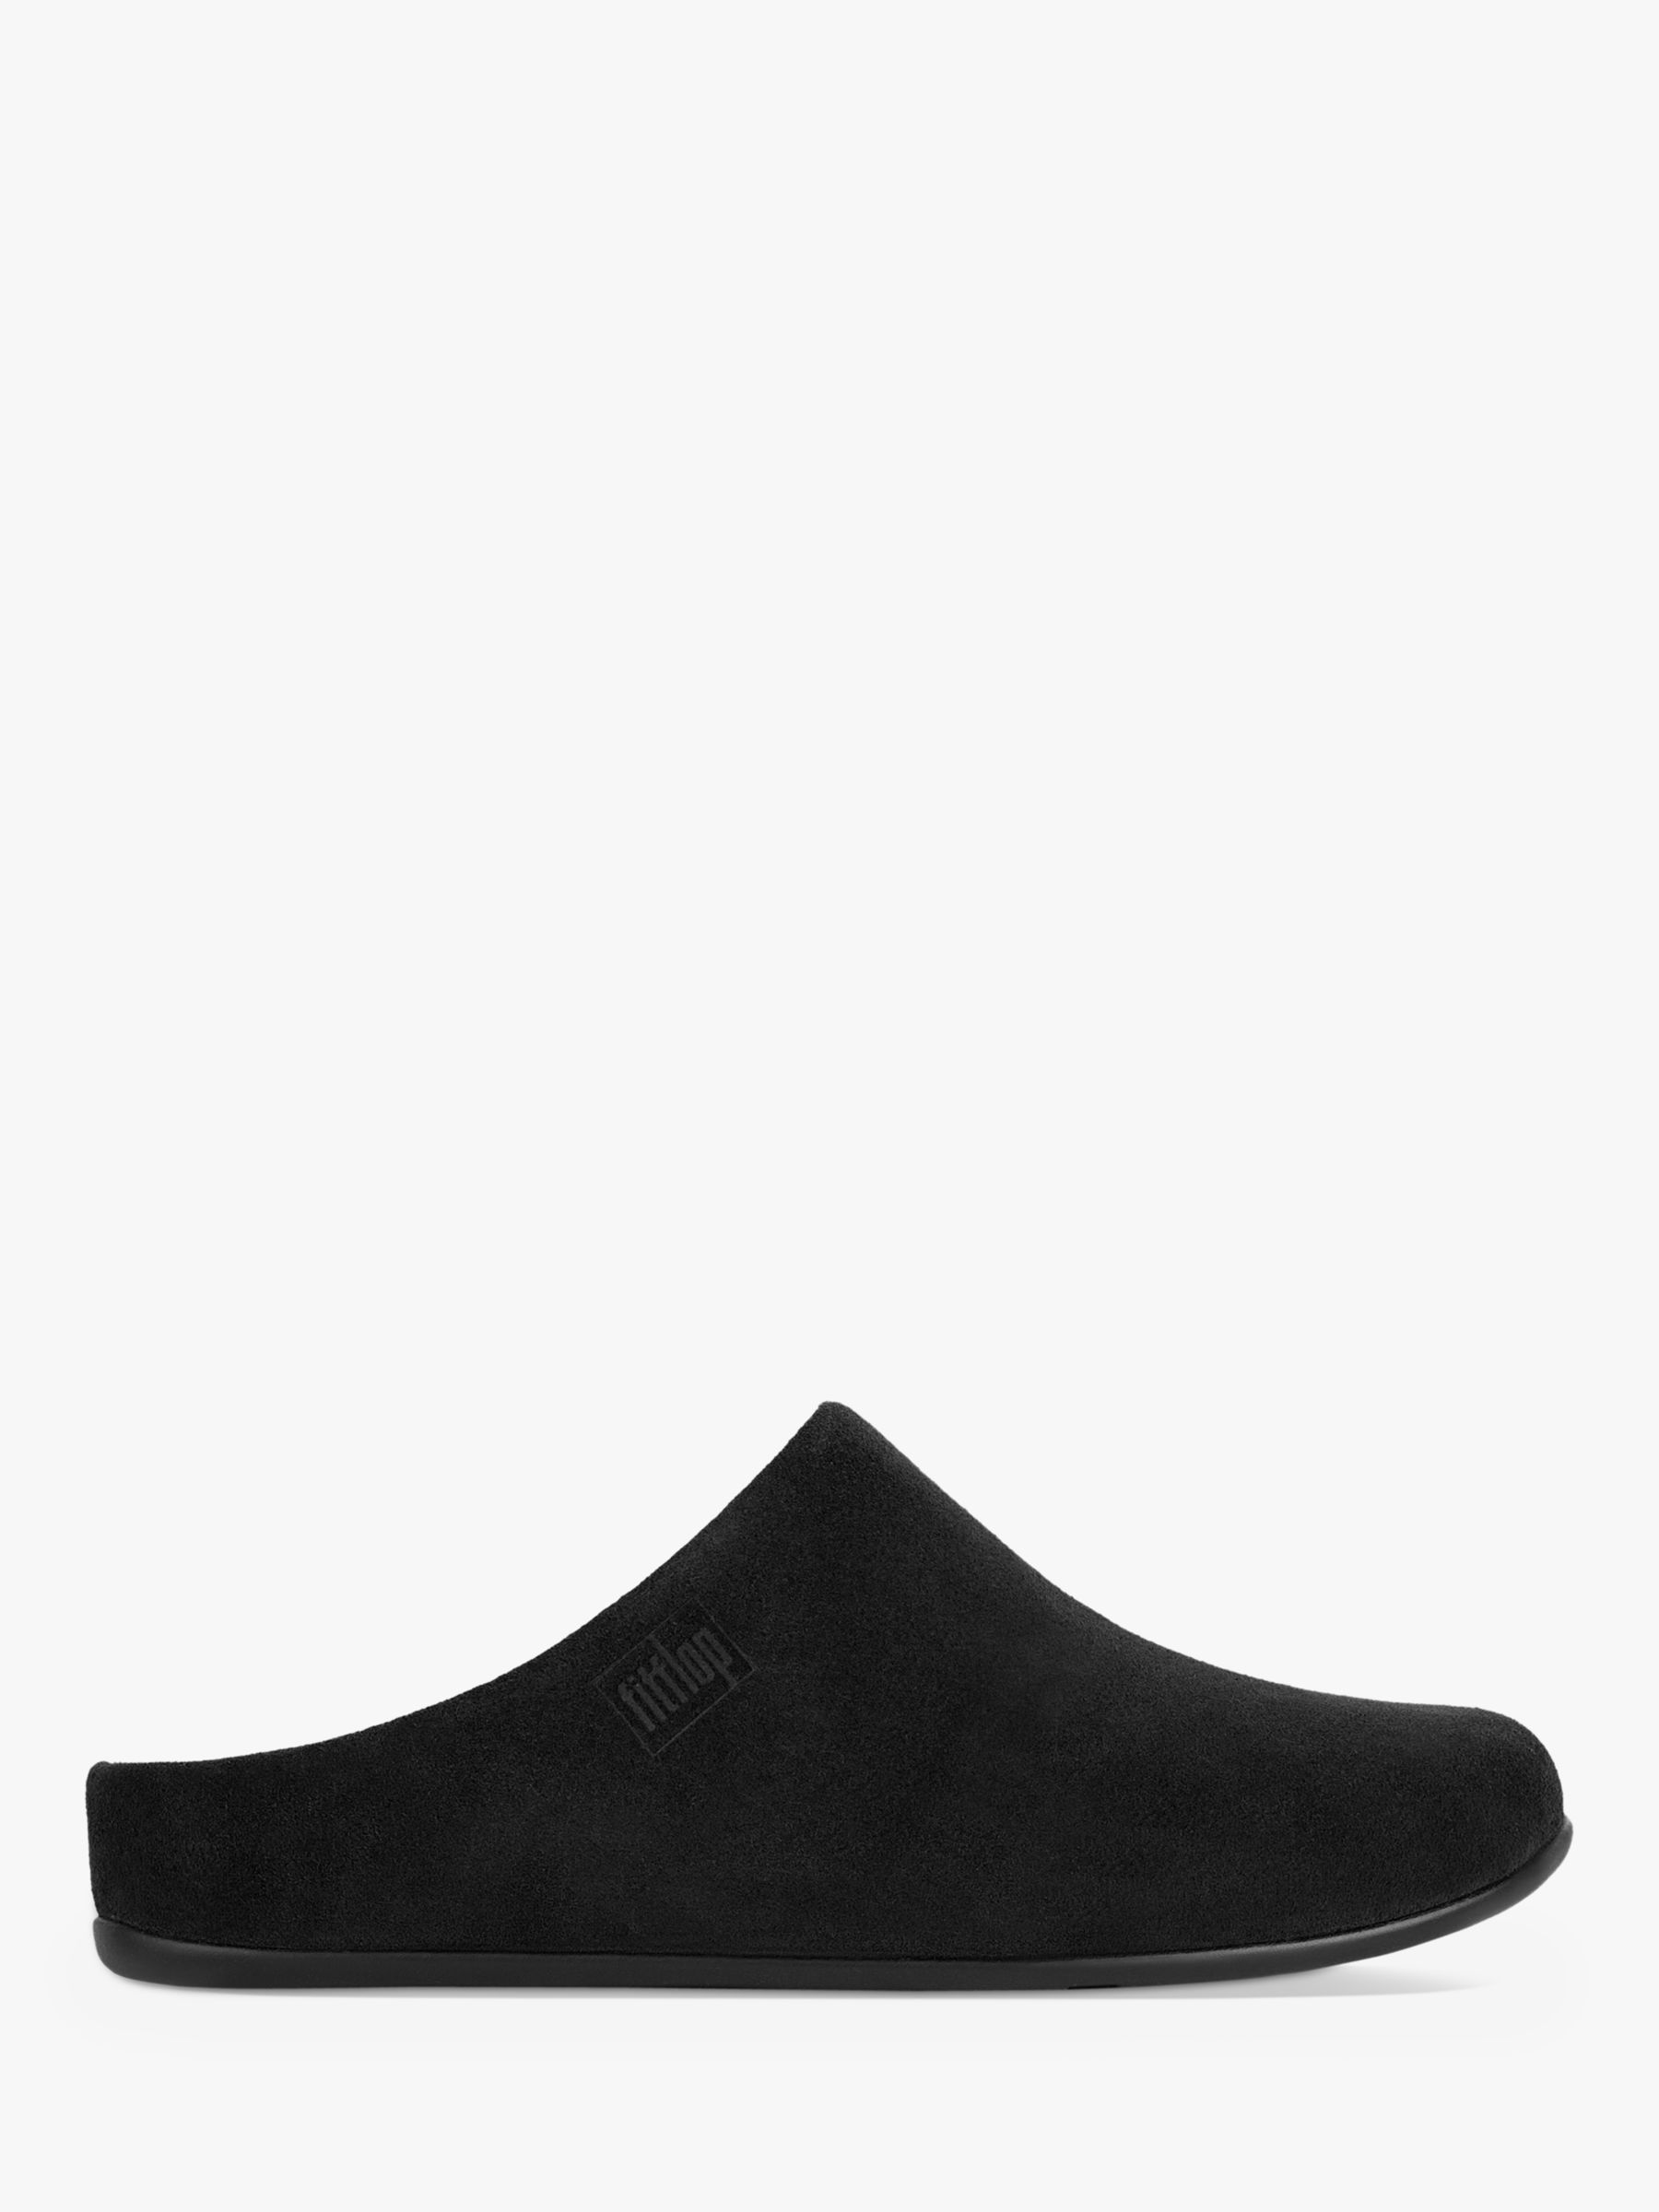 FitFlop Chrissie Shearling Lined Suede Slippers, Black at John Lewis ...